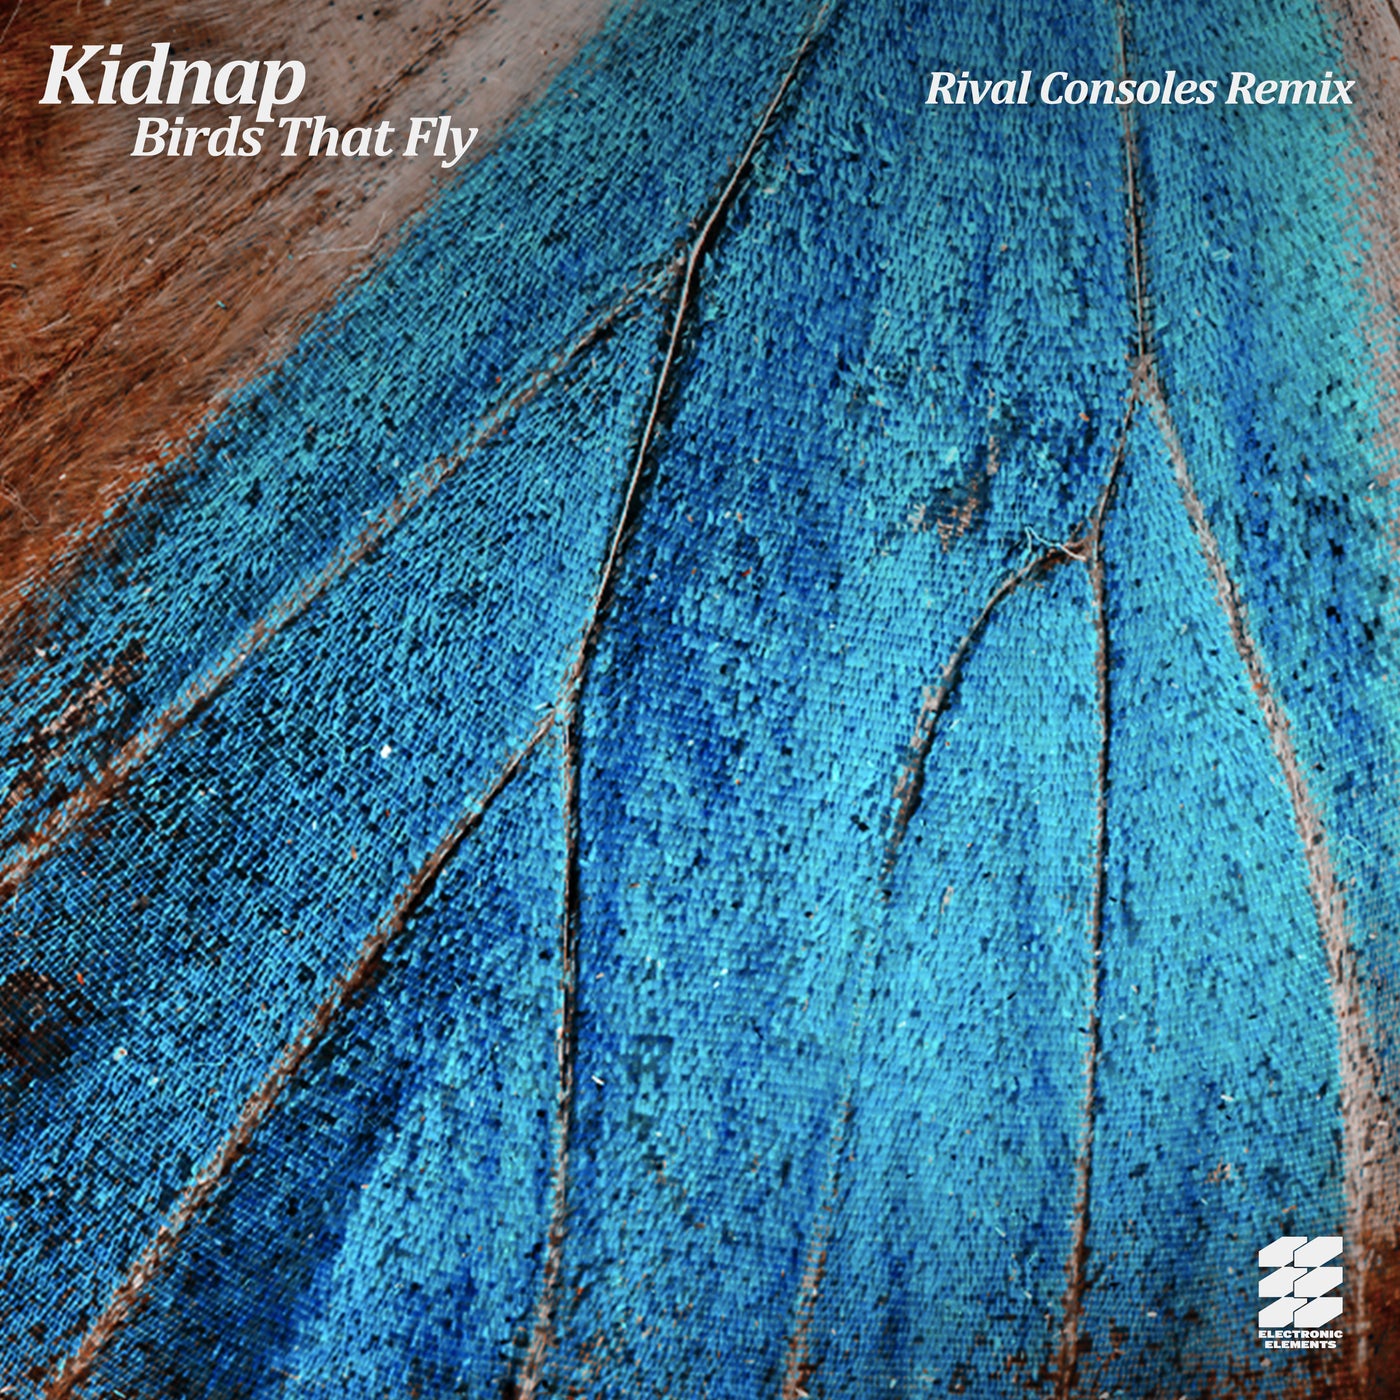 Birds That Fly - Rival Consoles Remix